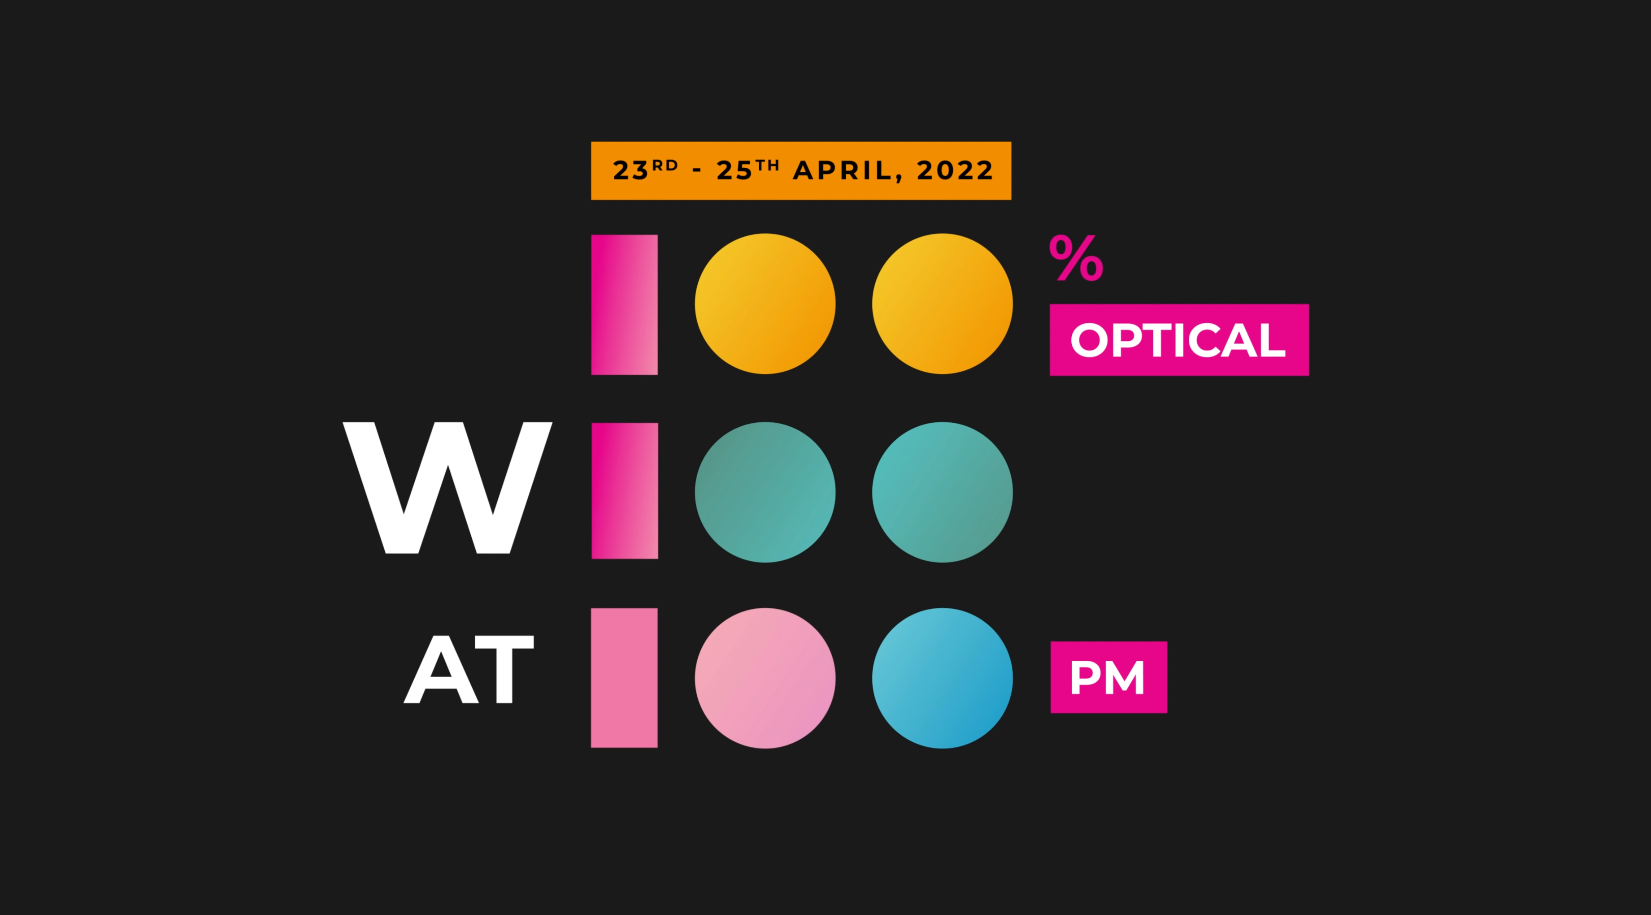 Continental Eyewear will be at 100% Optical this April!